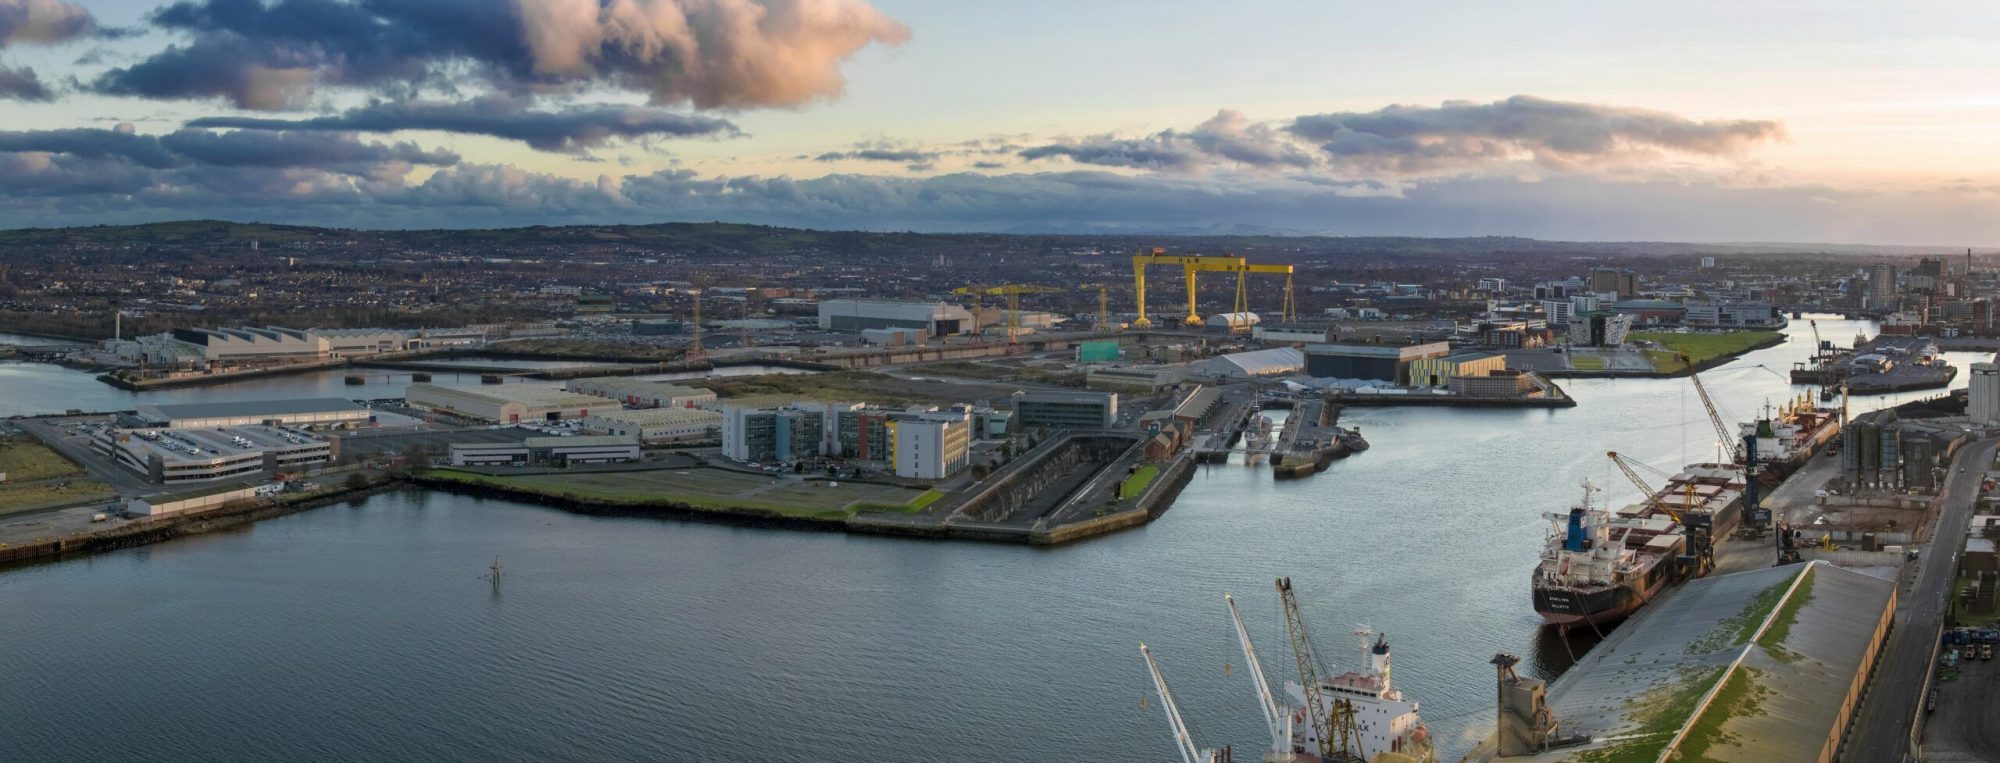 Minister launches bold and ambitious vision for the Northern Ireland economy